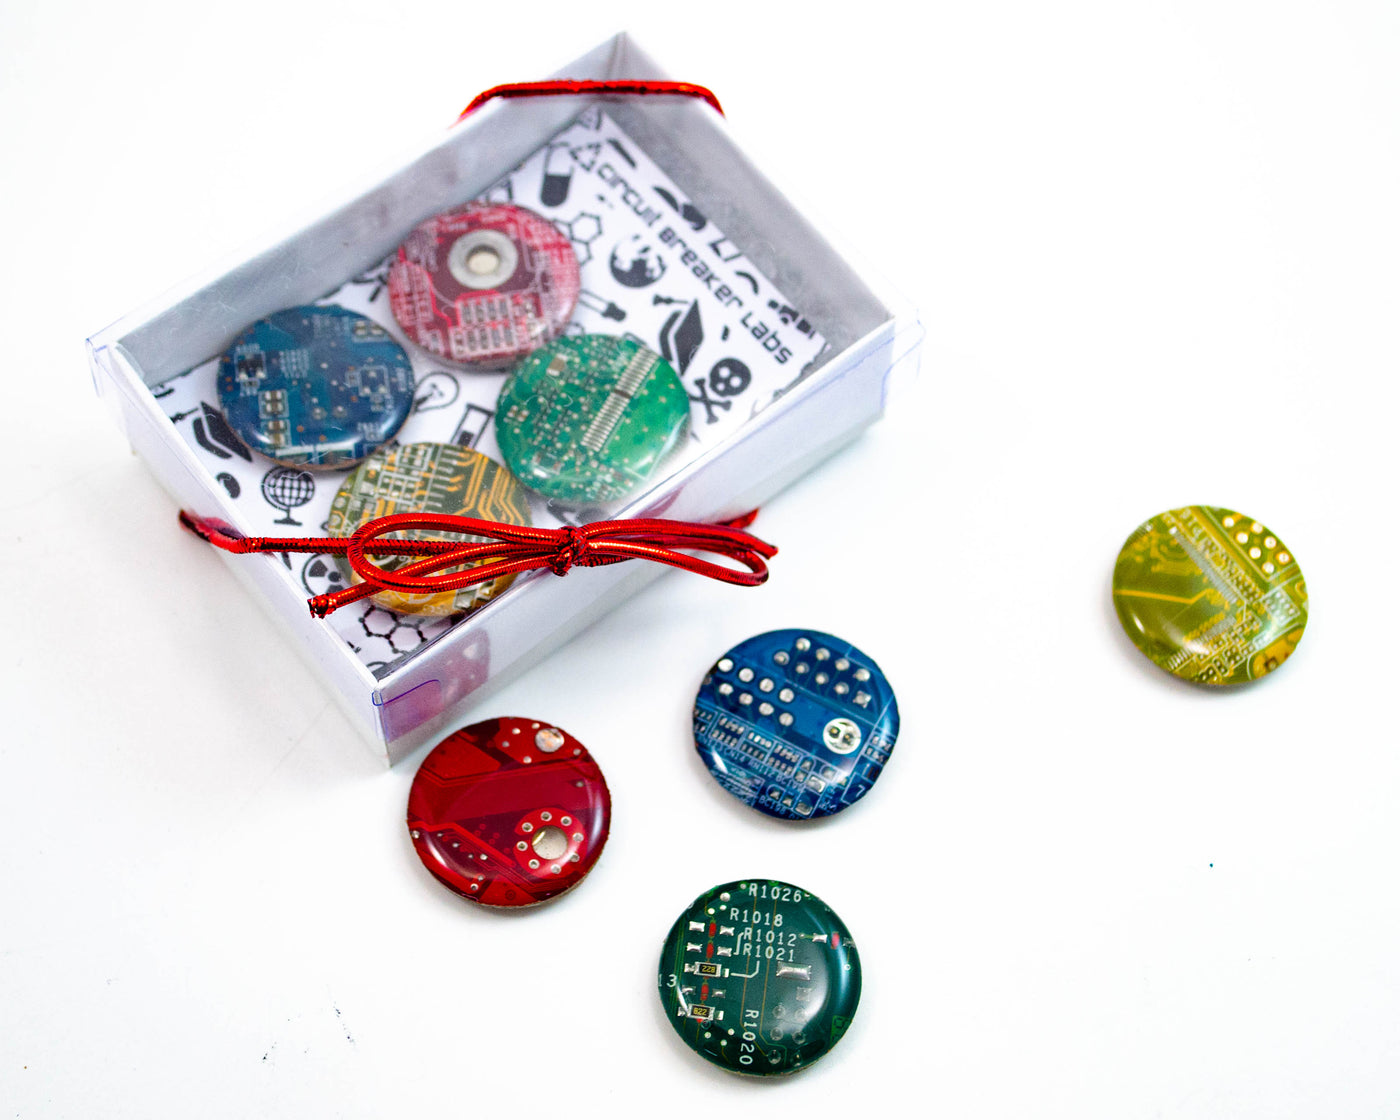 Circuit Board Magnet Set - Computer Science Gift